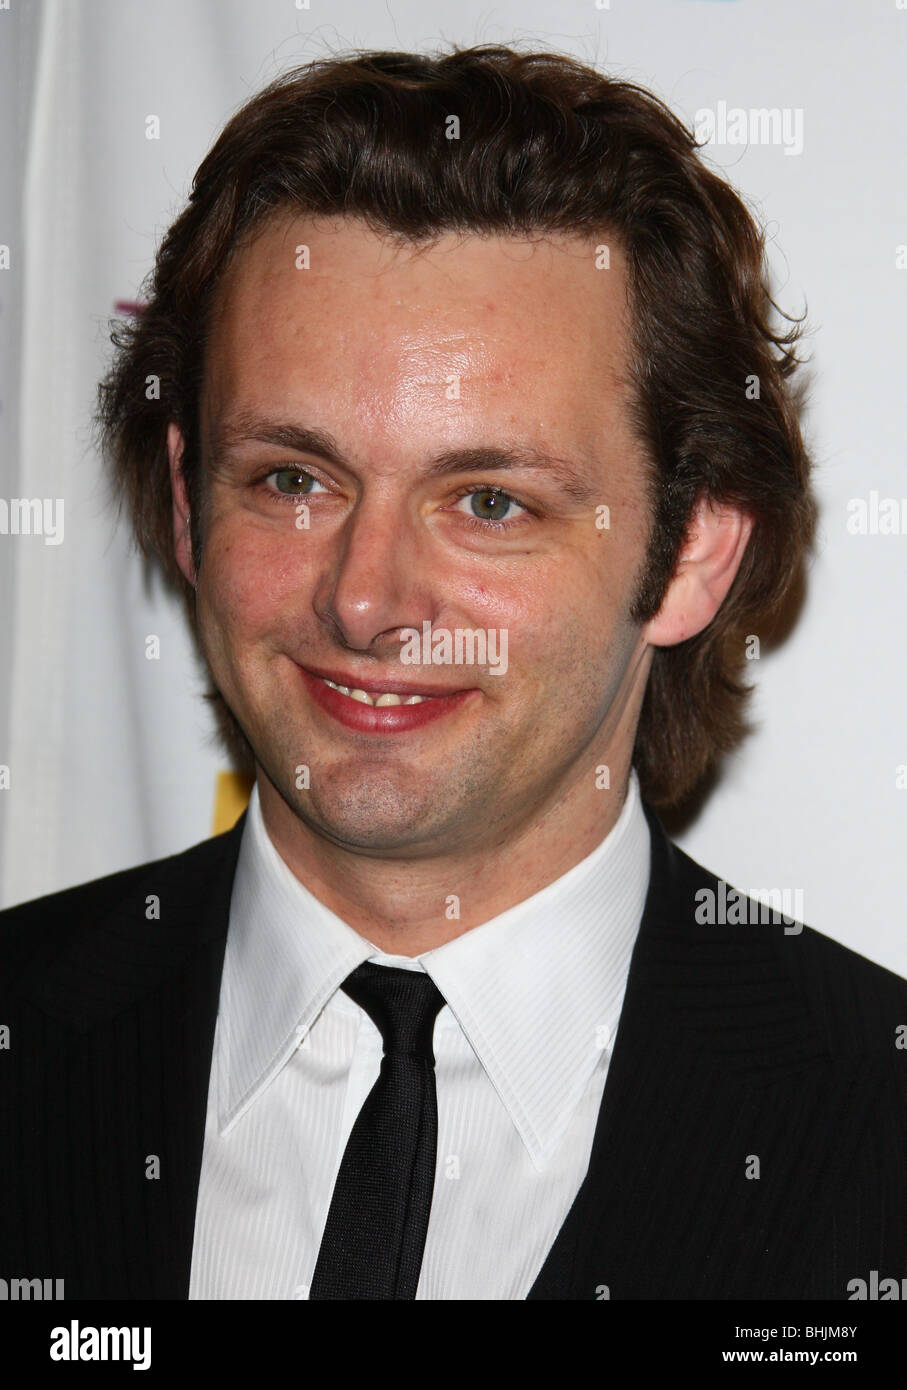 MICHAEL SHEEN 11TH ANNUAL HOLLYWOOD AWARDS HOLLYWOOD FILM FESTIVAL LOS ANGELES CA USA 22 October 2007 Stock Photo